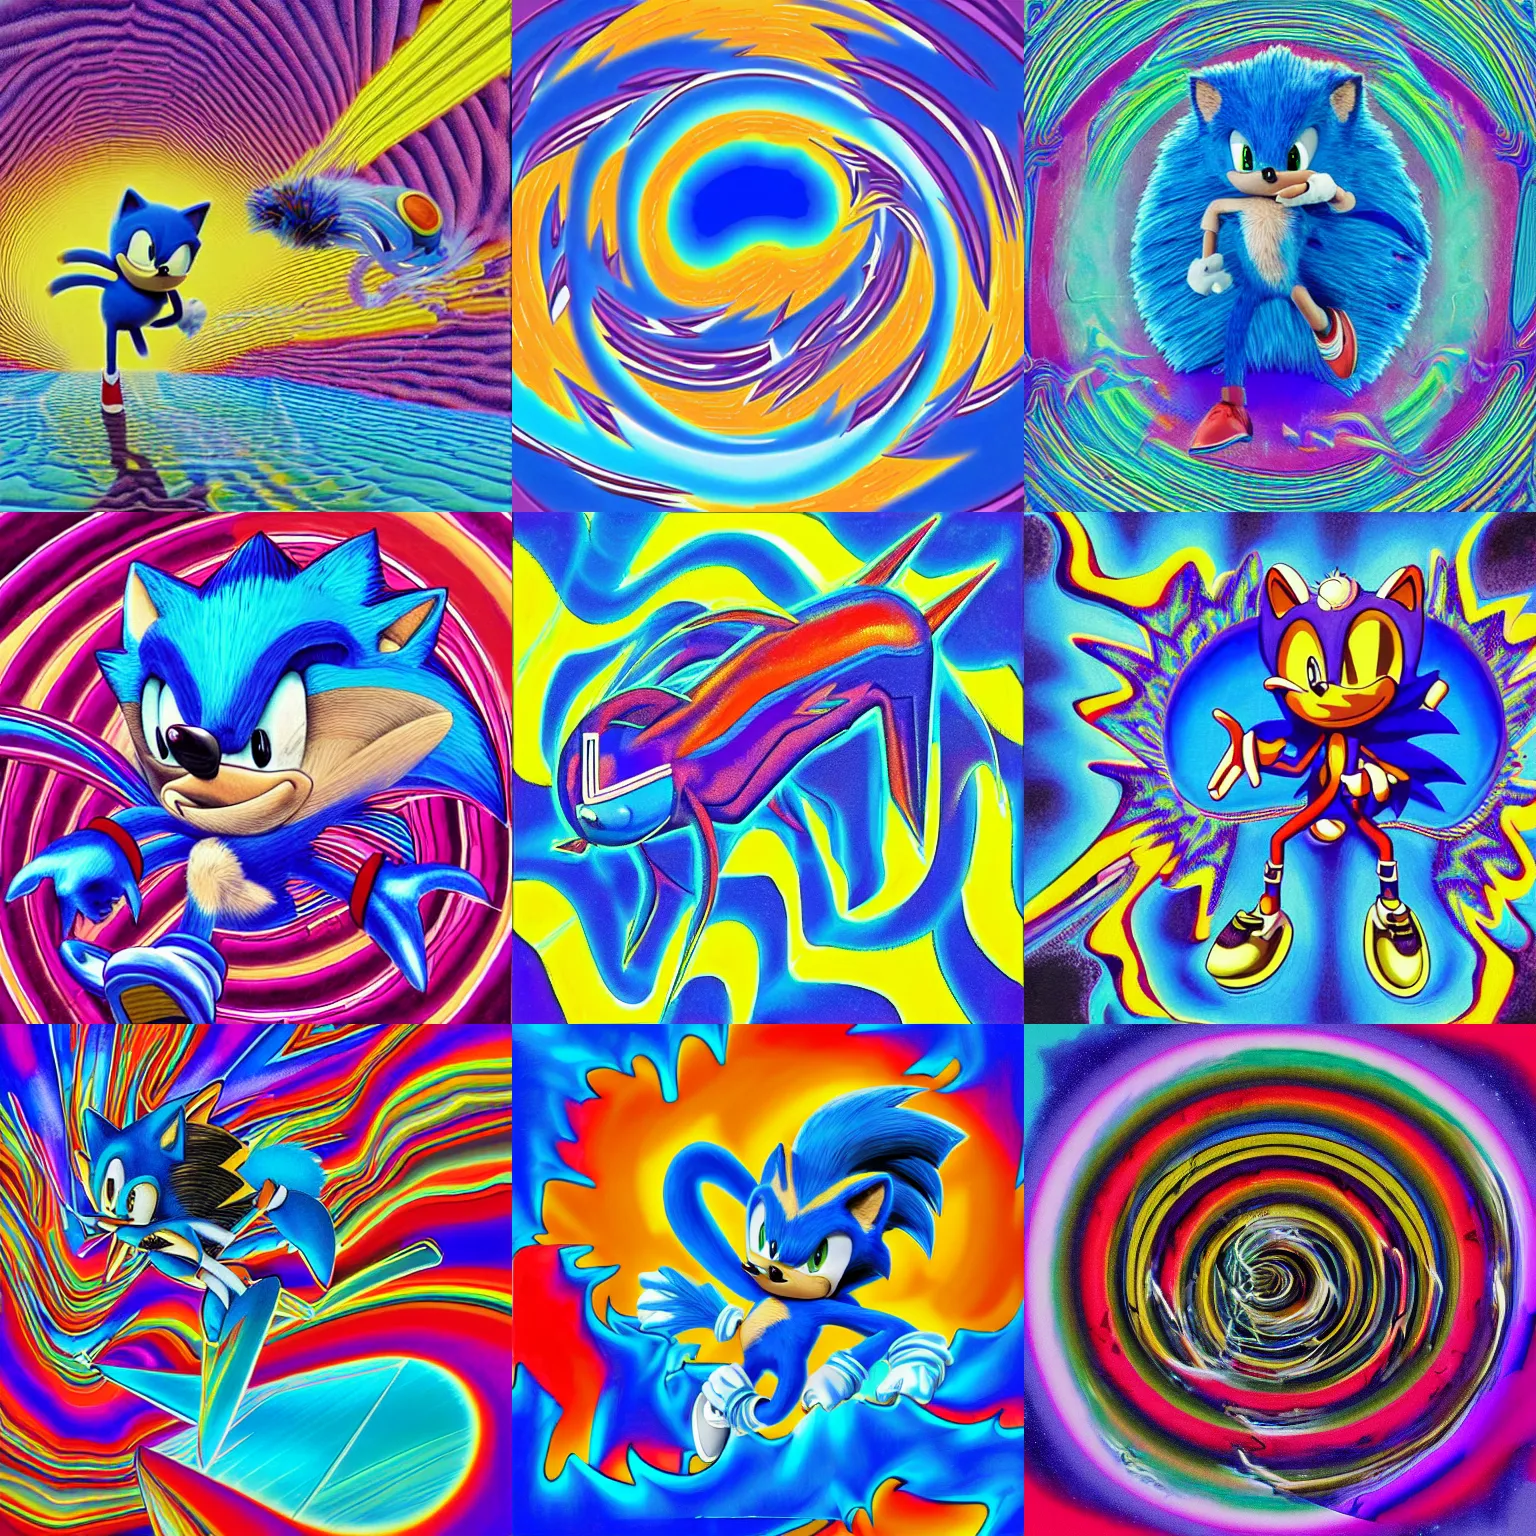 Prompt: recursive portrait of a surreal blue sonic hedgehog, sharp, detailed professional, high quality airbrush art MGMT tame impala album cover of a liquid dissolving LSD DMT sonic the hedgehog surfing through cyberspace, purple checkerboard background, 1990s 1992 Sega Genesis video game album cover, sonic the hedgehog